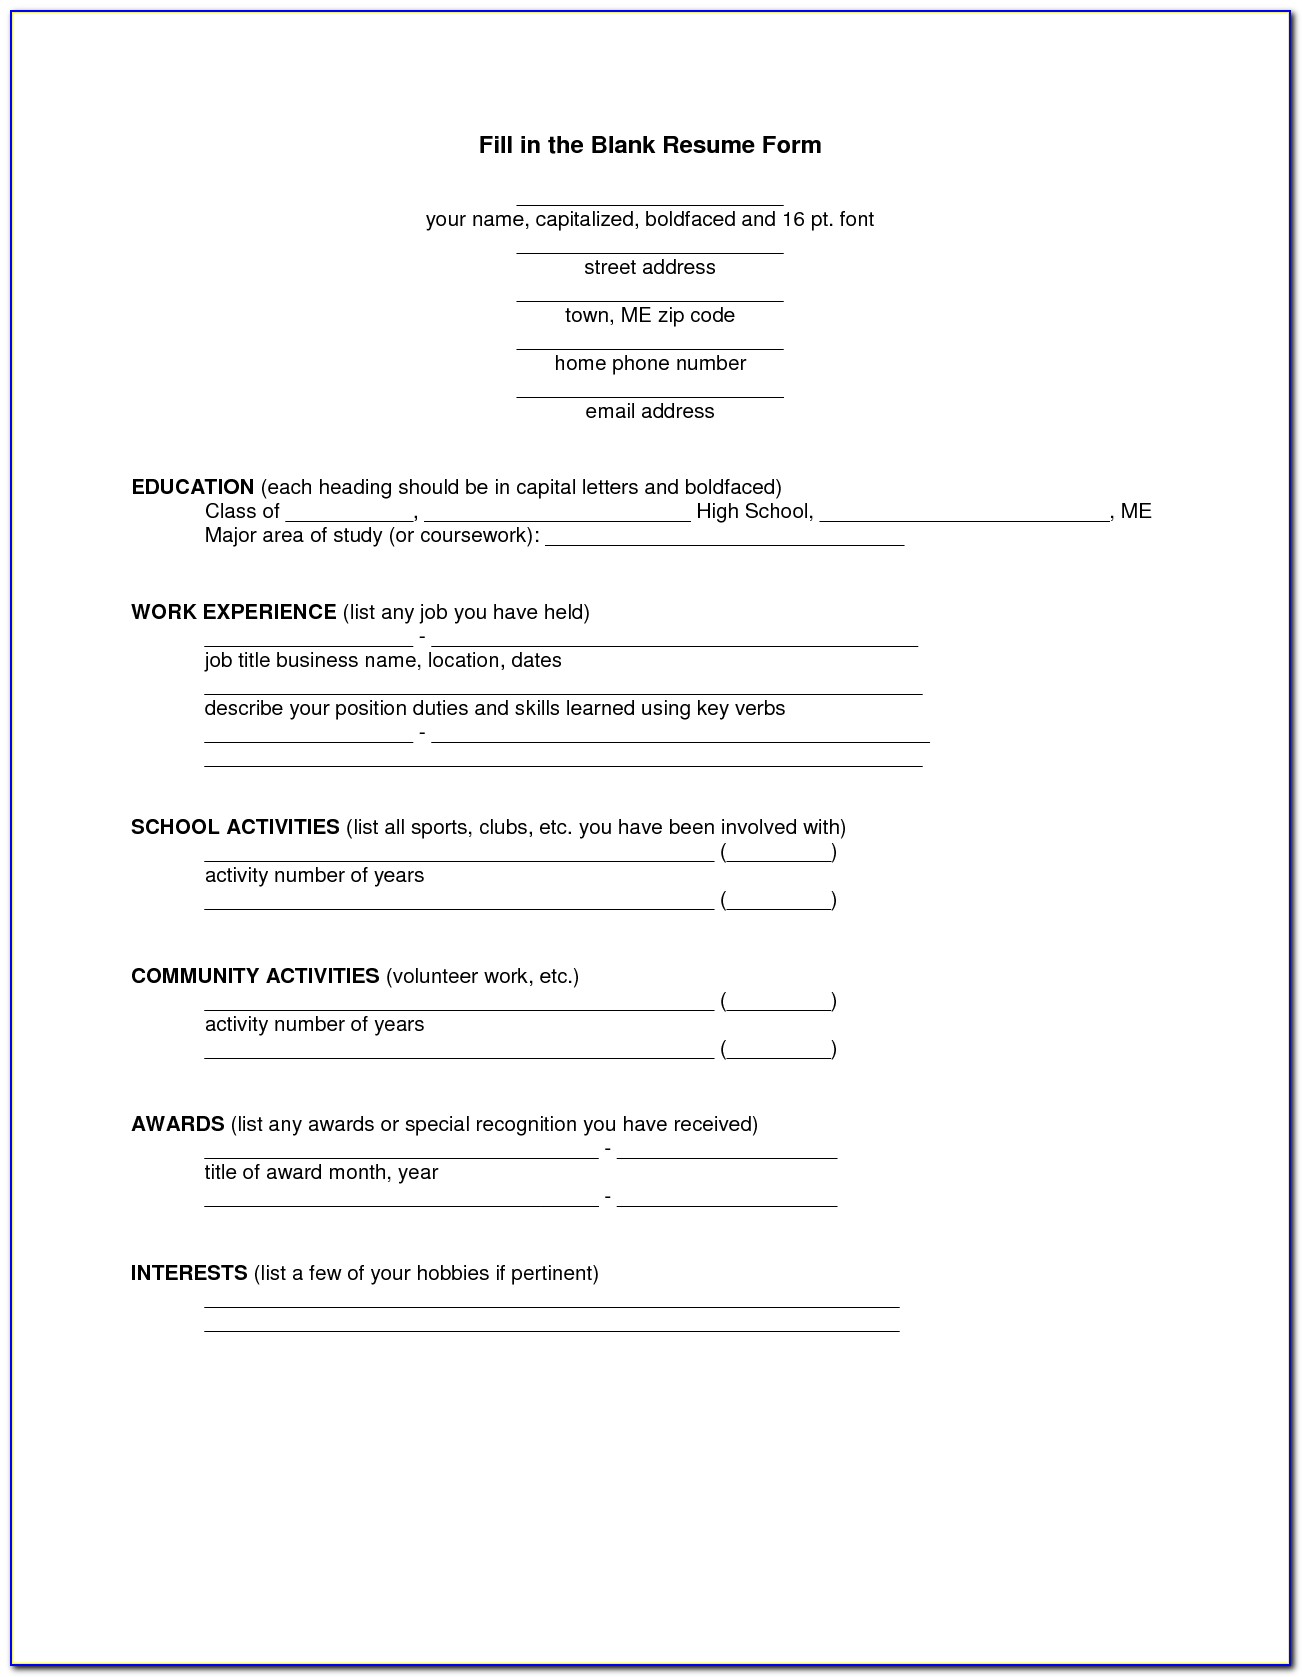 Fill In The Blank Word Document Template